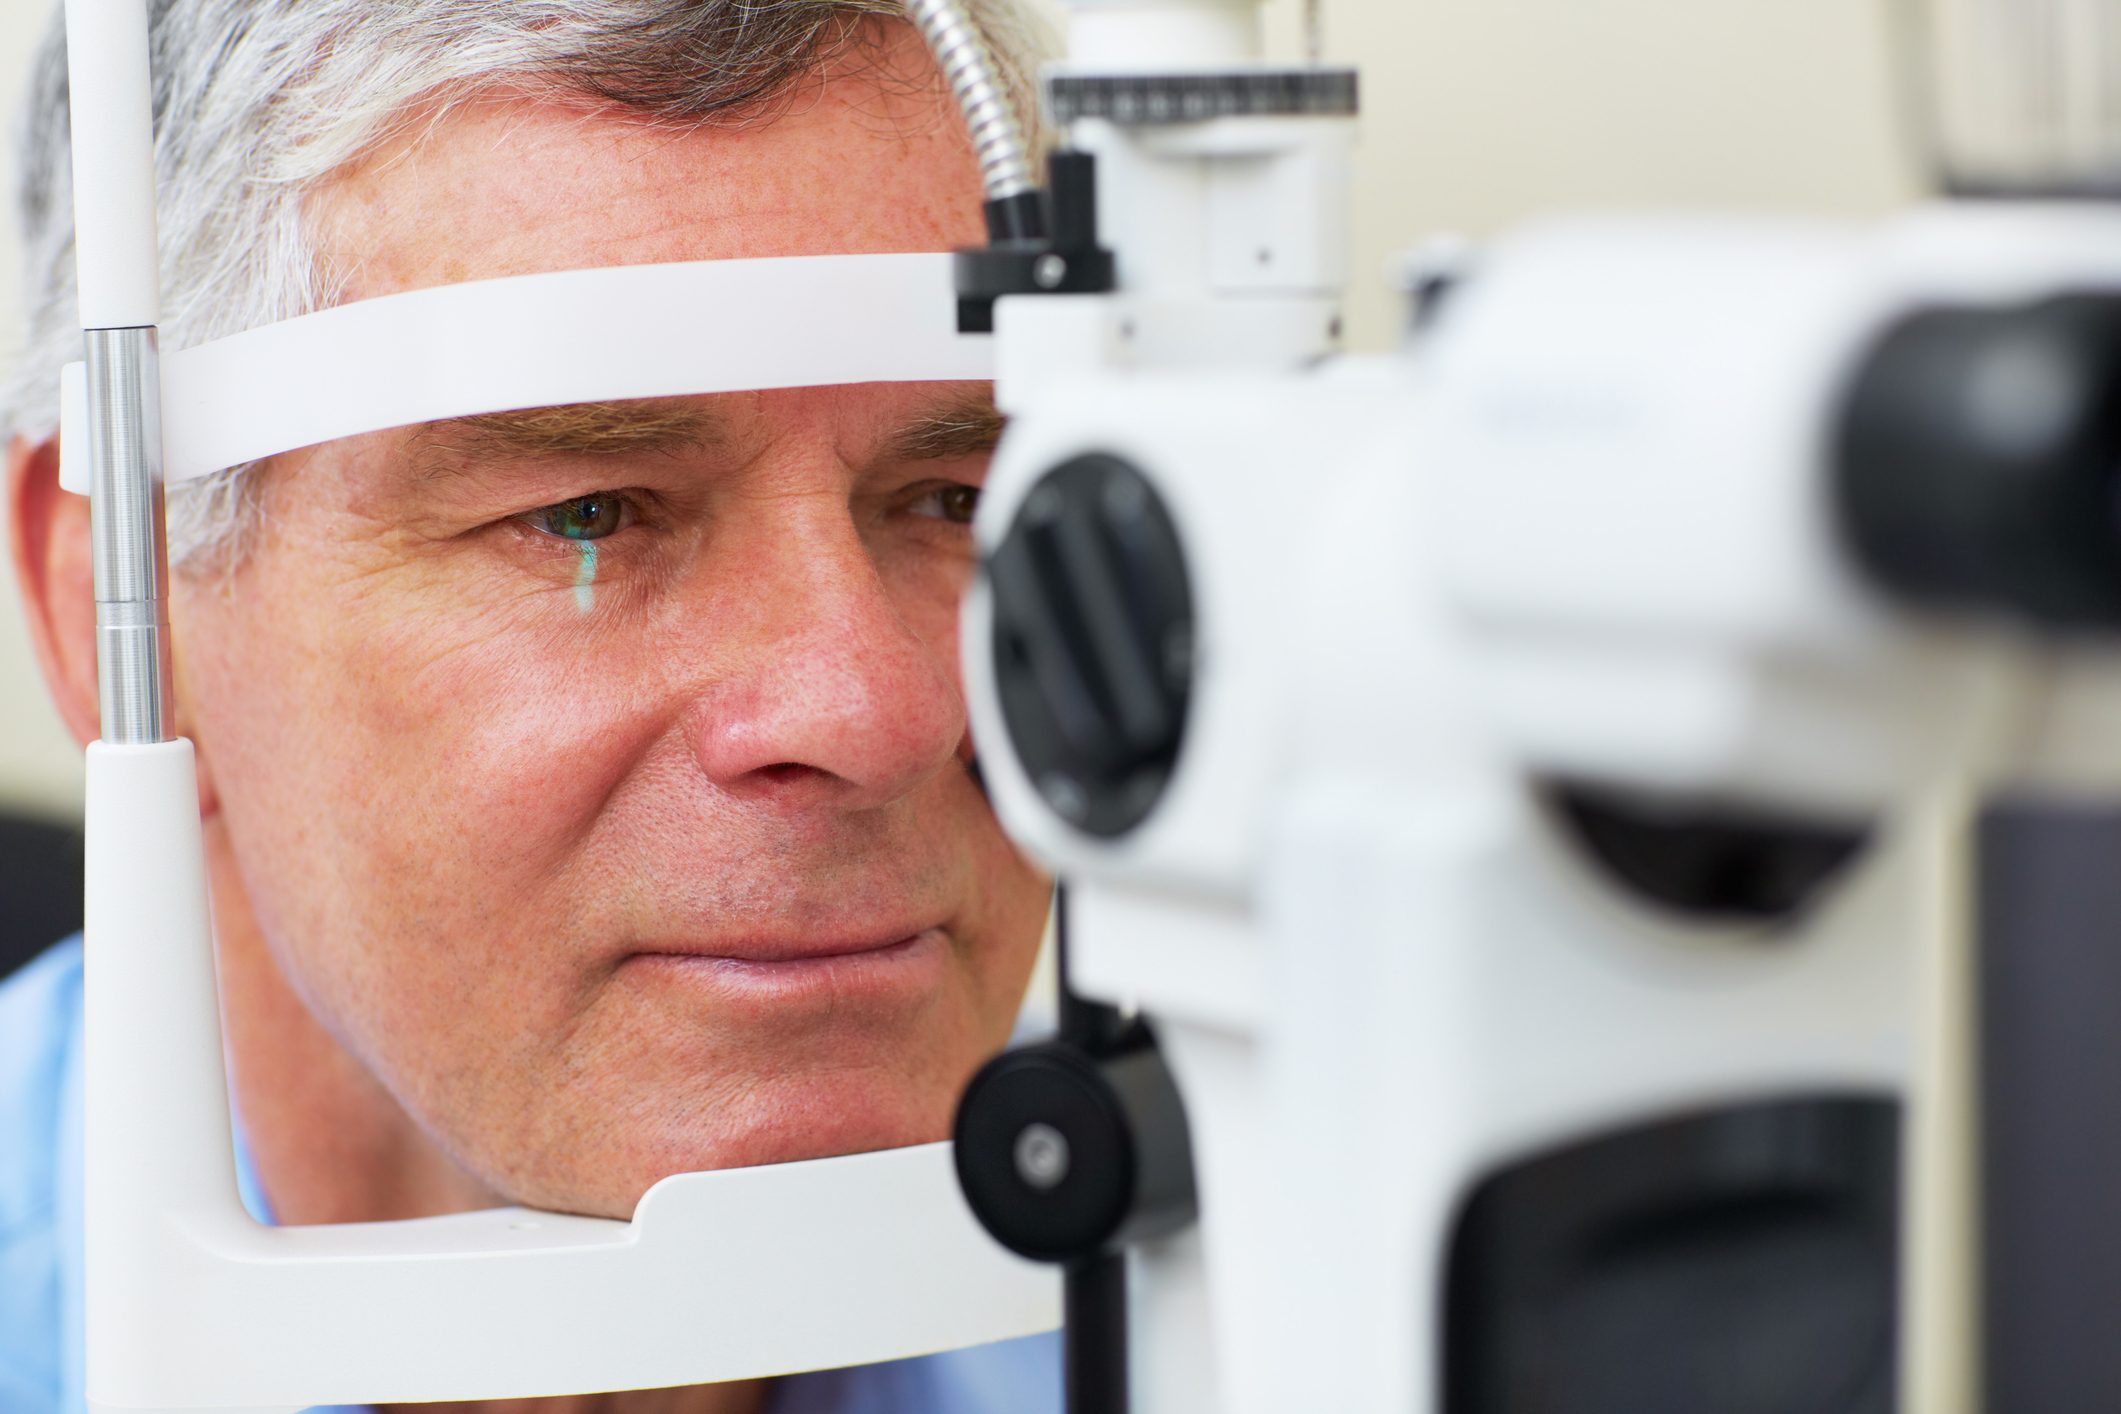 Middle aged man undergoing an eye test with equipment